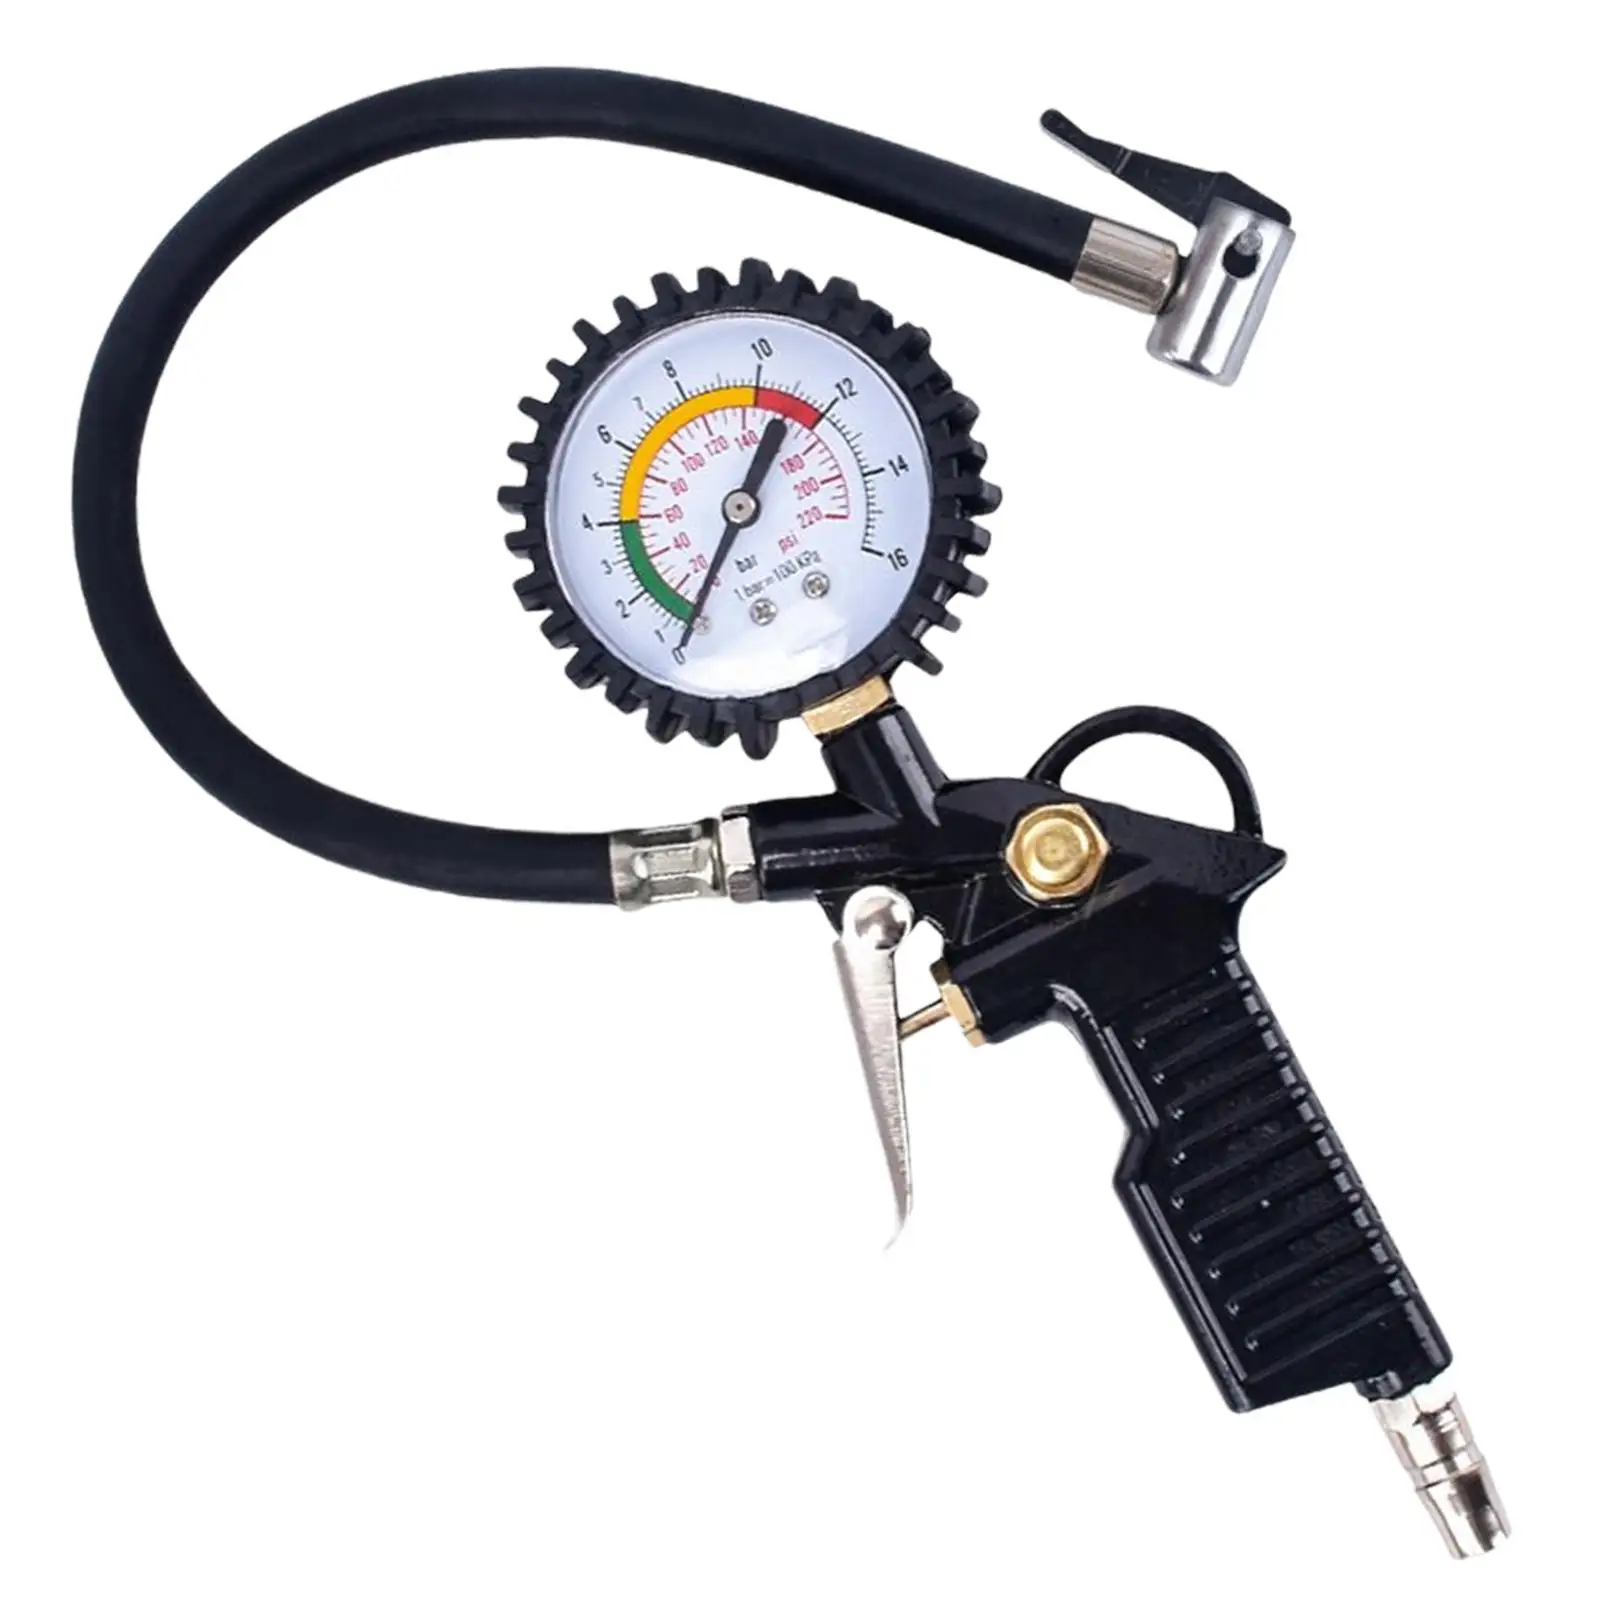 Tire Pressure Tester High-Precision Measurement Tool Fits for Auto Repair Factory